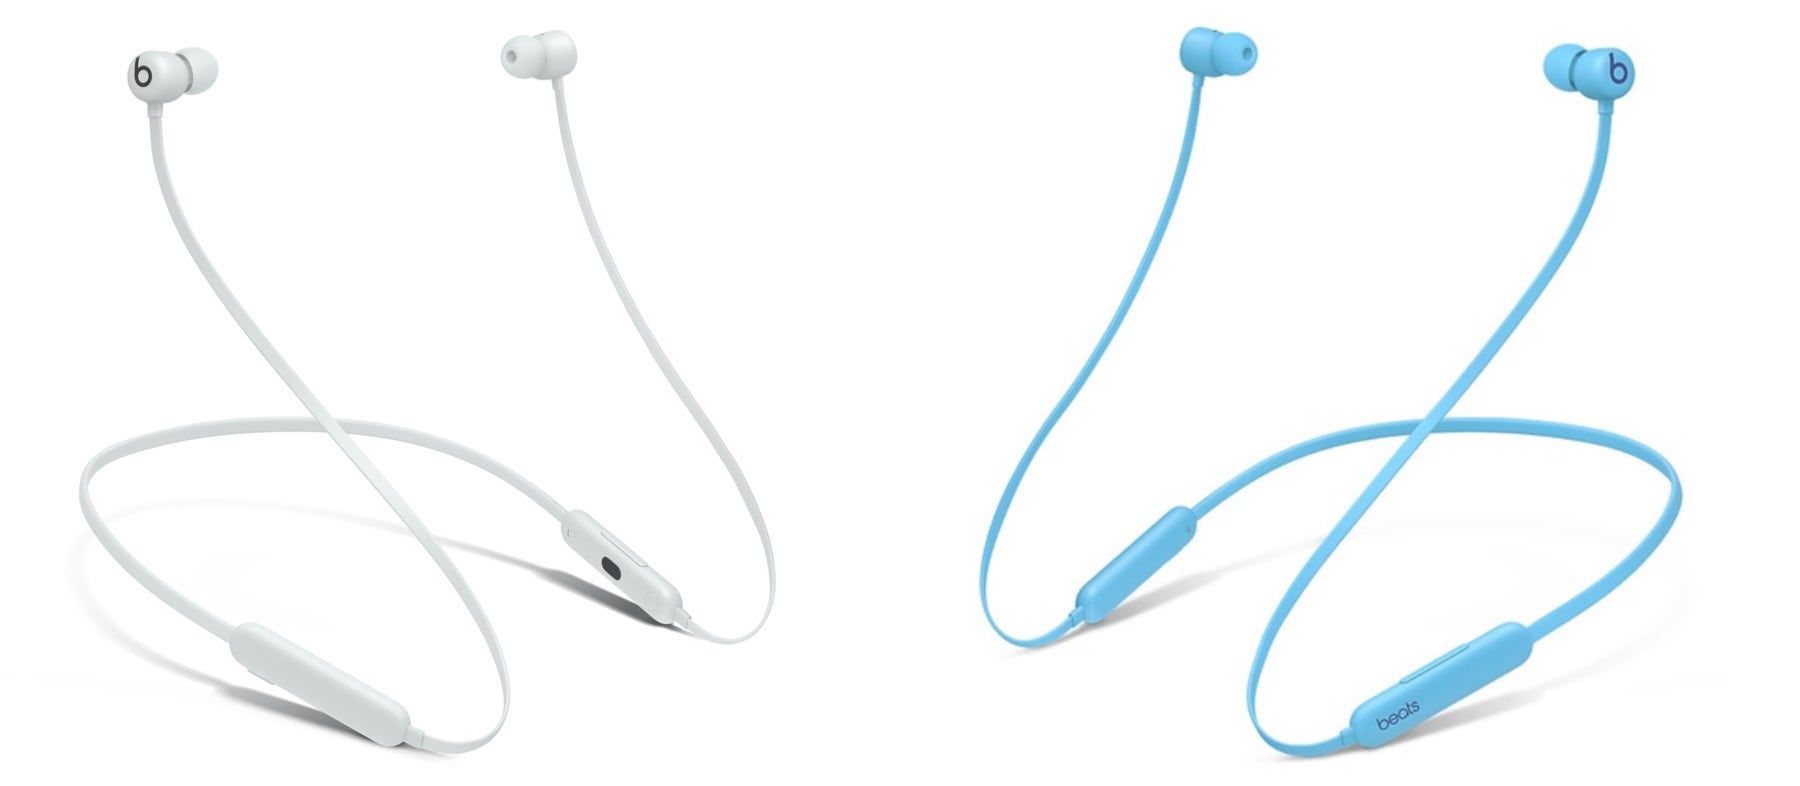 Apple Increases Price of Beats Flex Headphones From $50 to $70